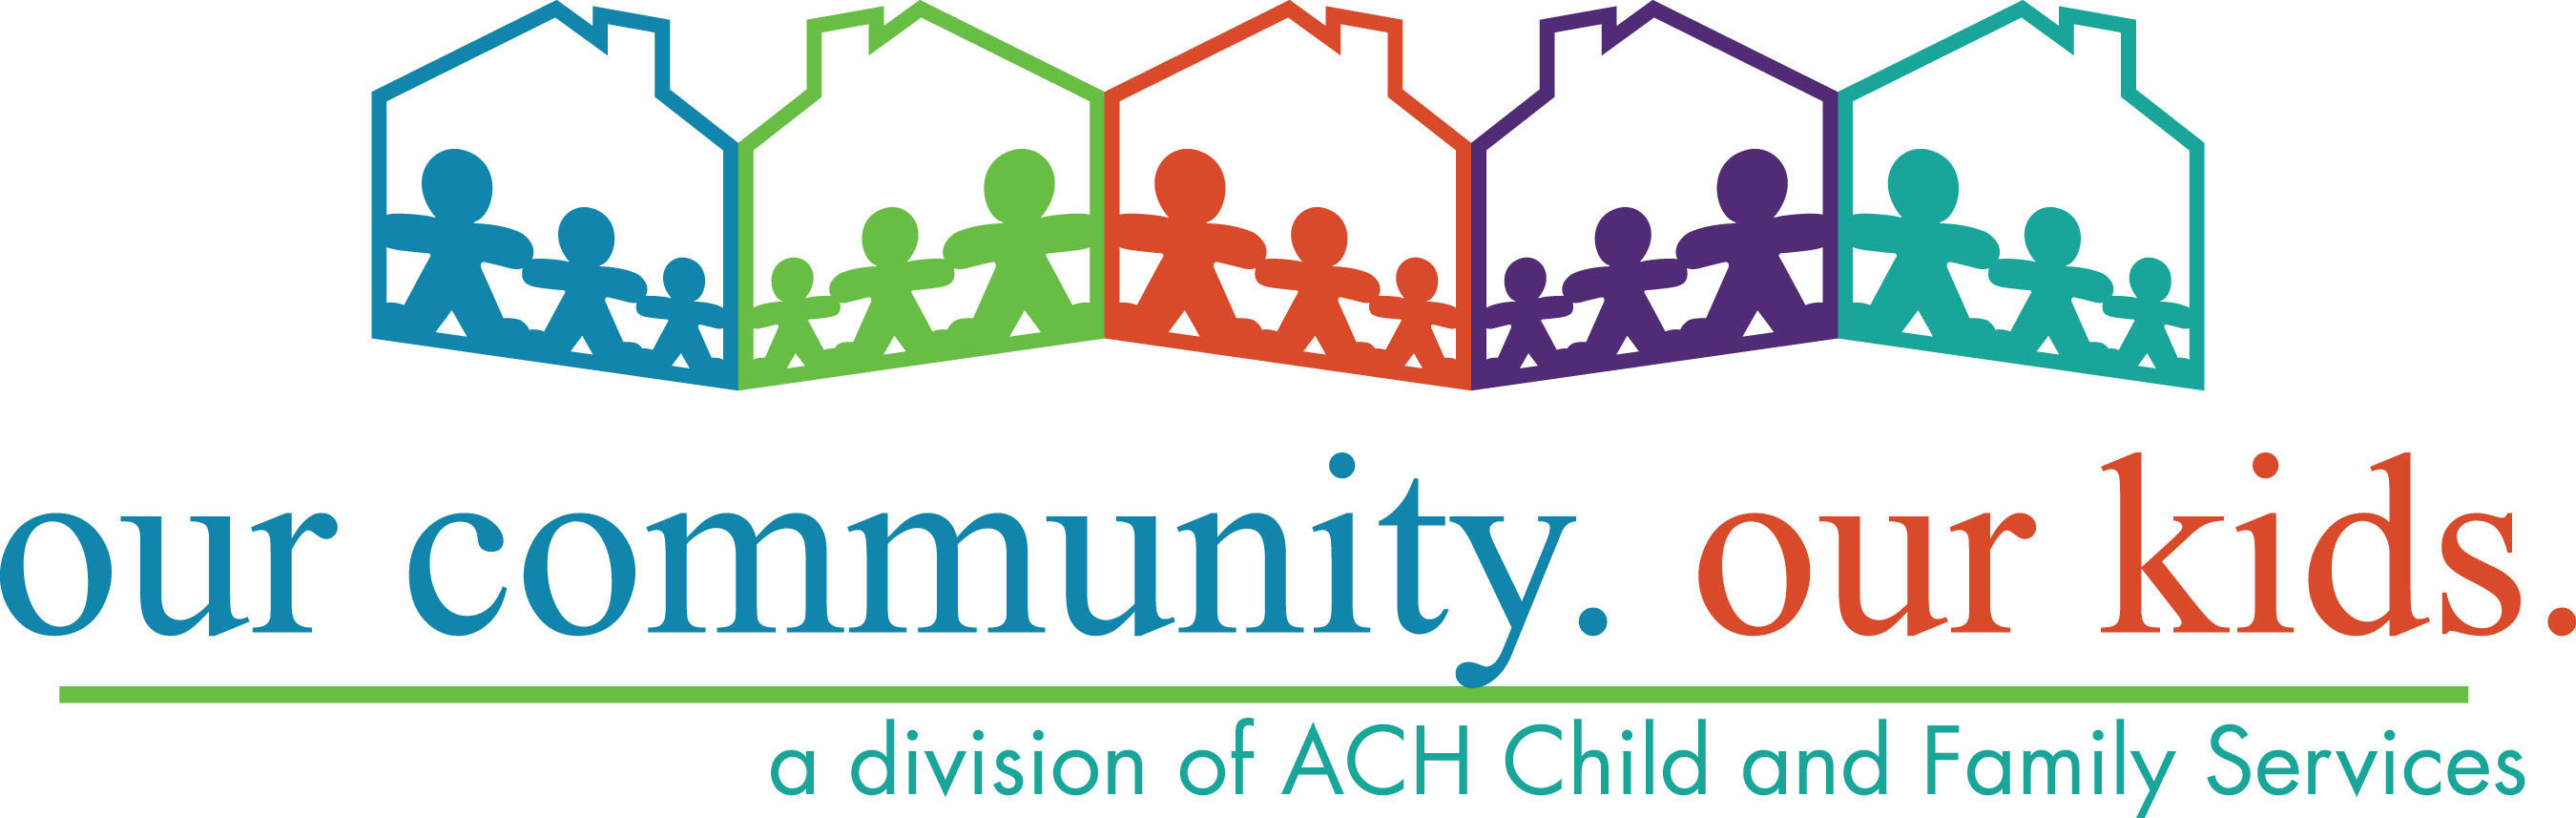 Our Community Our Kids is a division of ACH Child and Family Services in Fort Worth, Texas. Our Community Our Kids represents the first urban implementation of Foster Care Redesign in Texas.